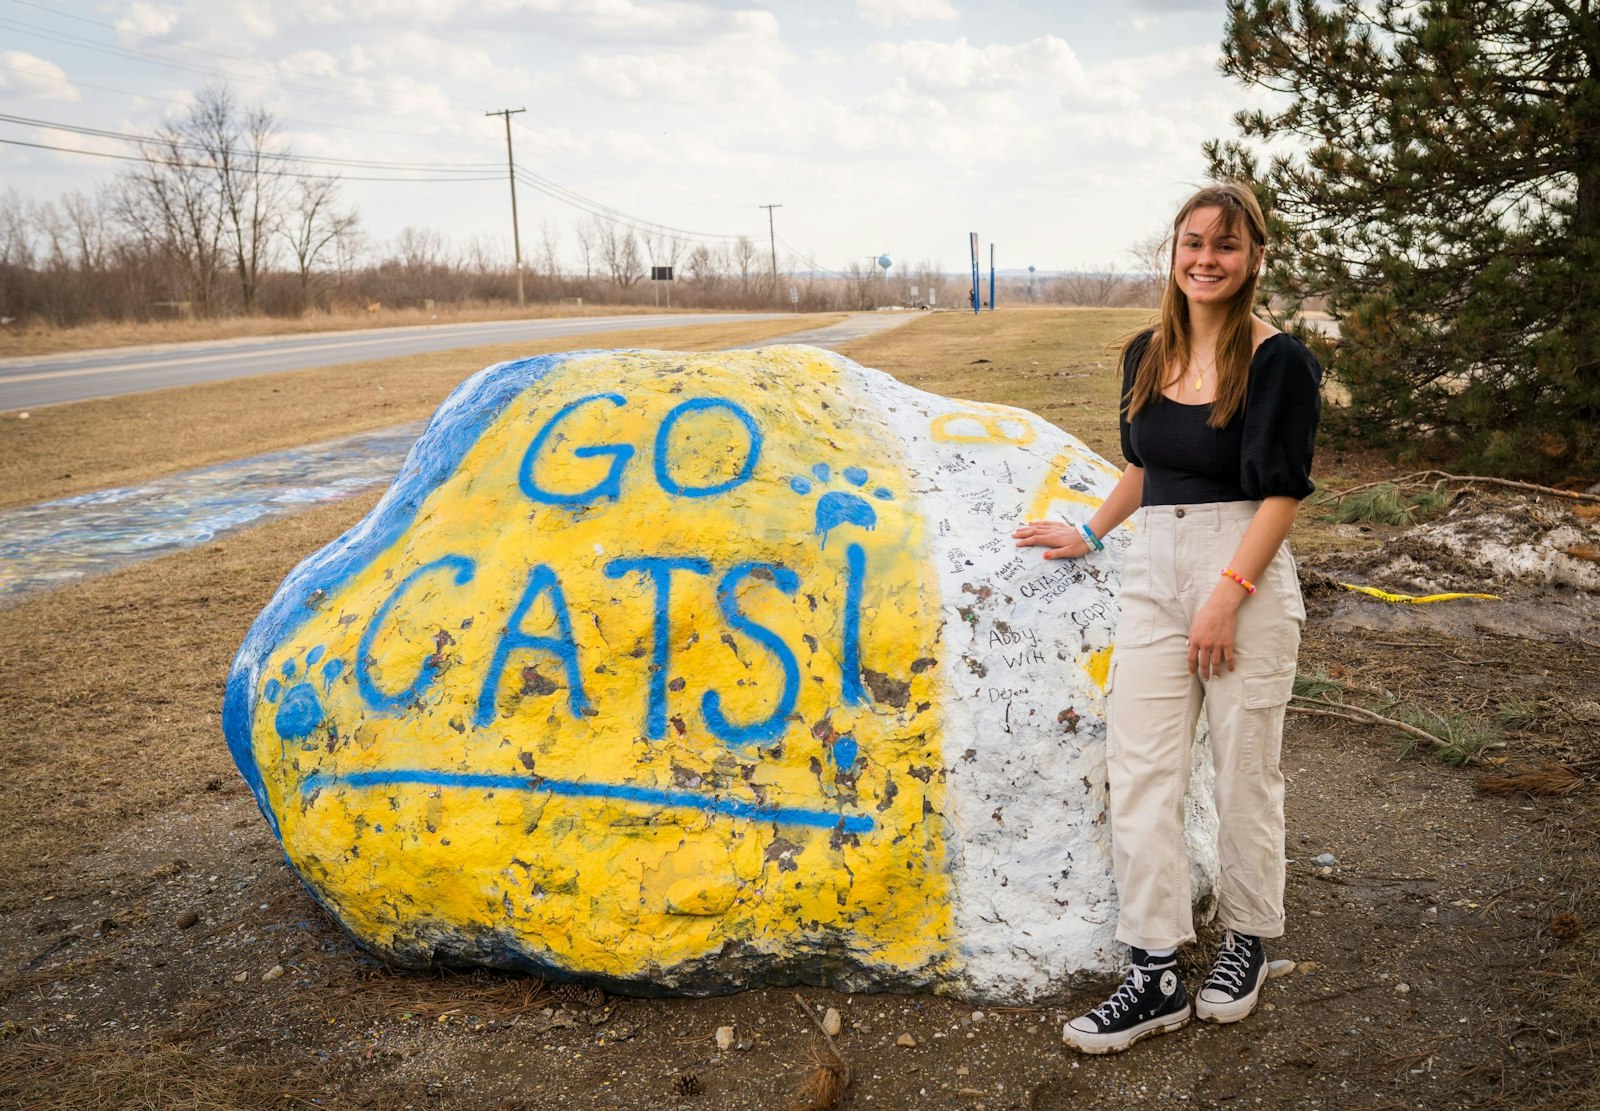 LeeAnn Johnson is pictured near the Oxford High School "rock," which students paint as an annual tradition. Though Johnson is leaving Oxford to pursue her college studies in biochemistry, she says she'll continue to use her experience to help others struggling with trauma and doubt to find faith in a God who loves them.